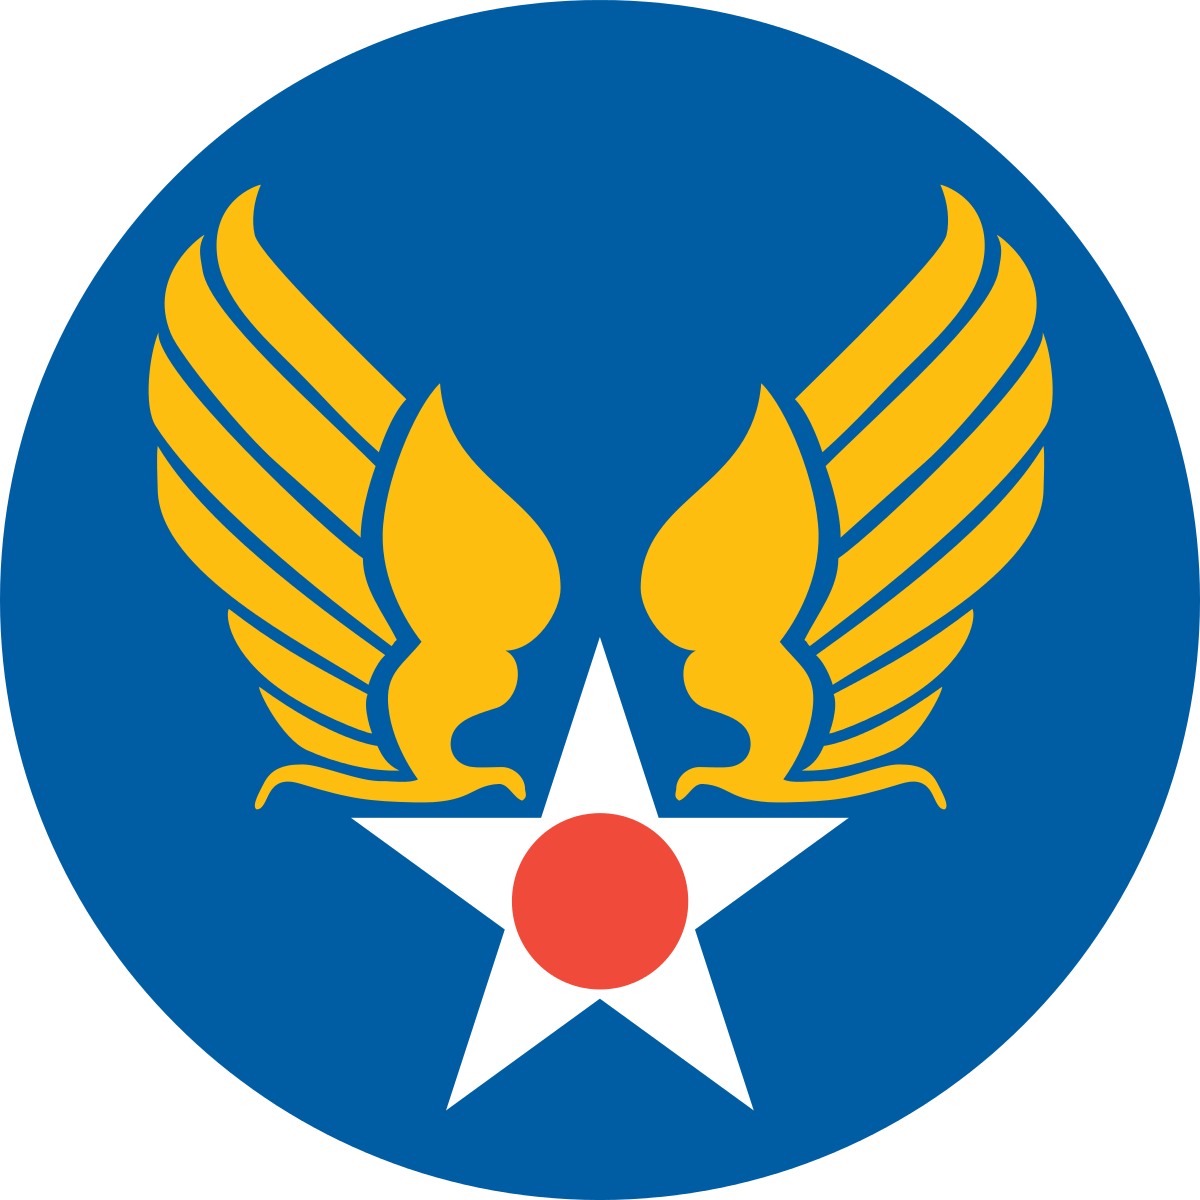 Air Force Old Logo - United States Army Air Forces